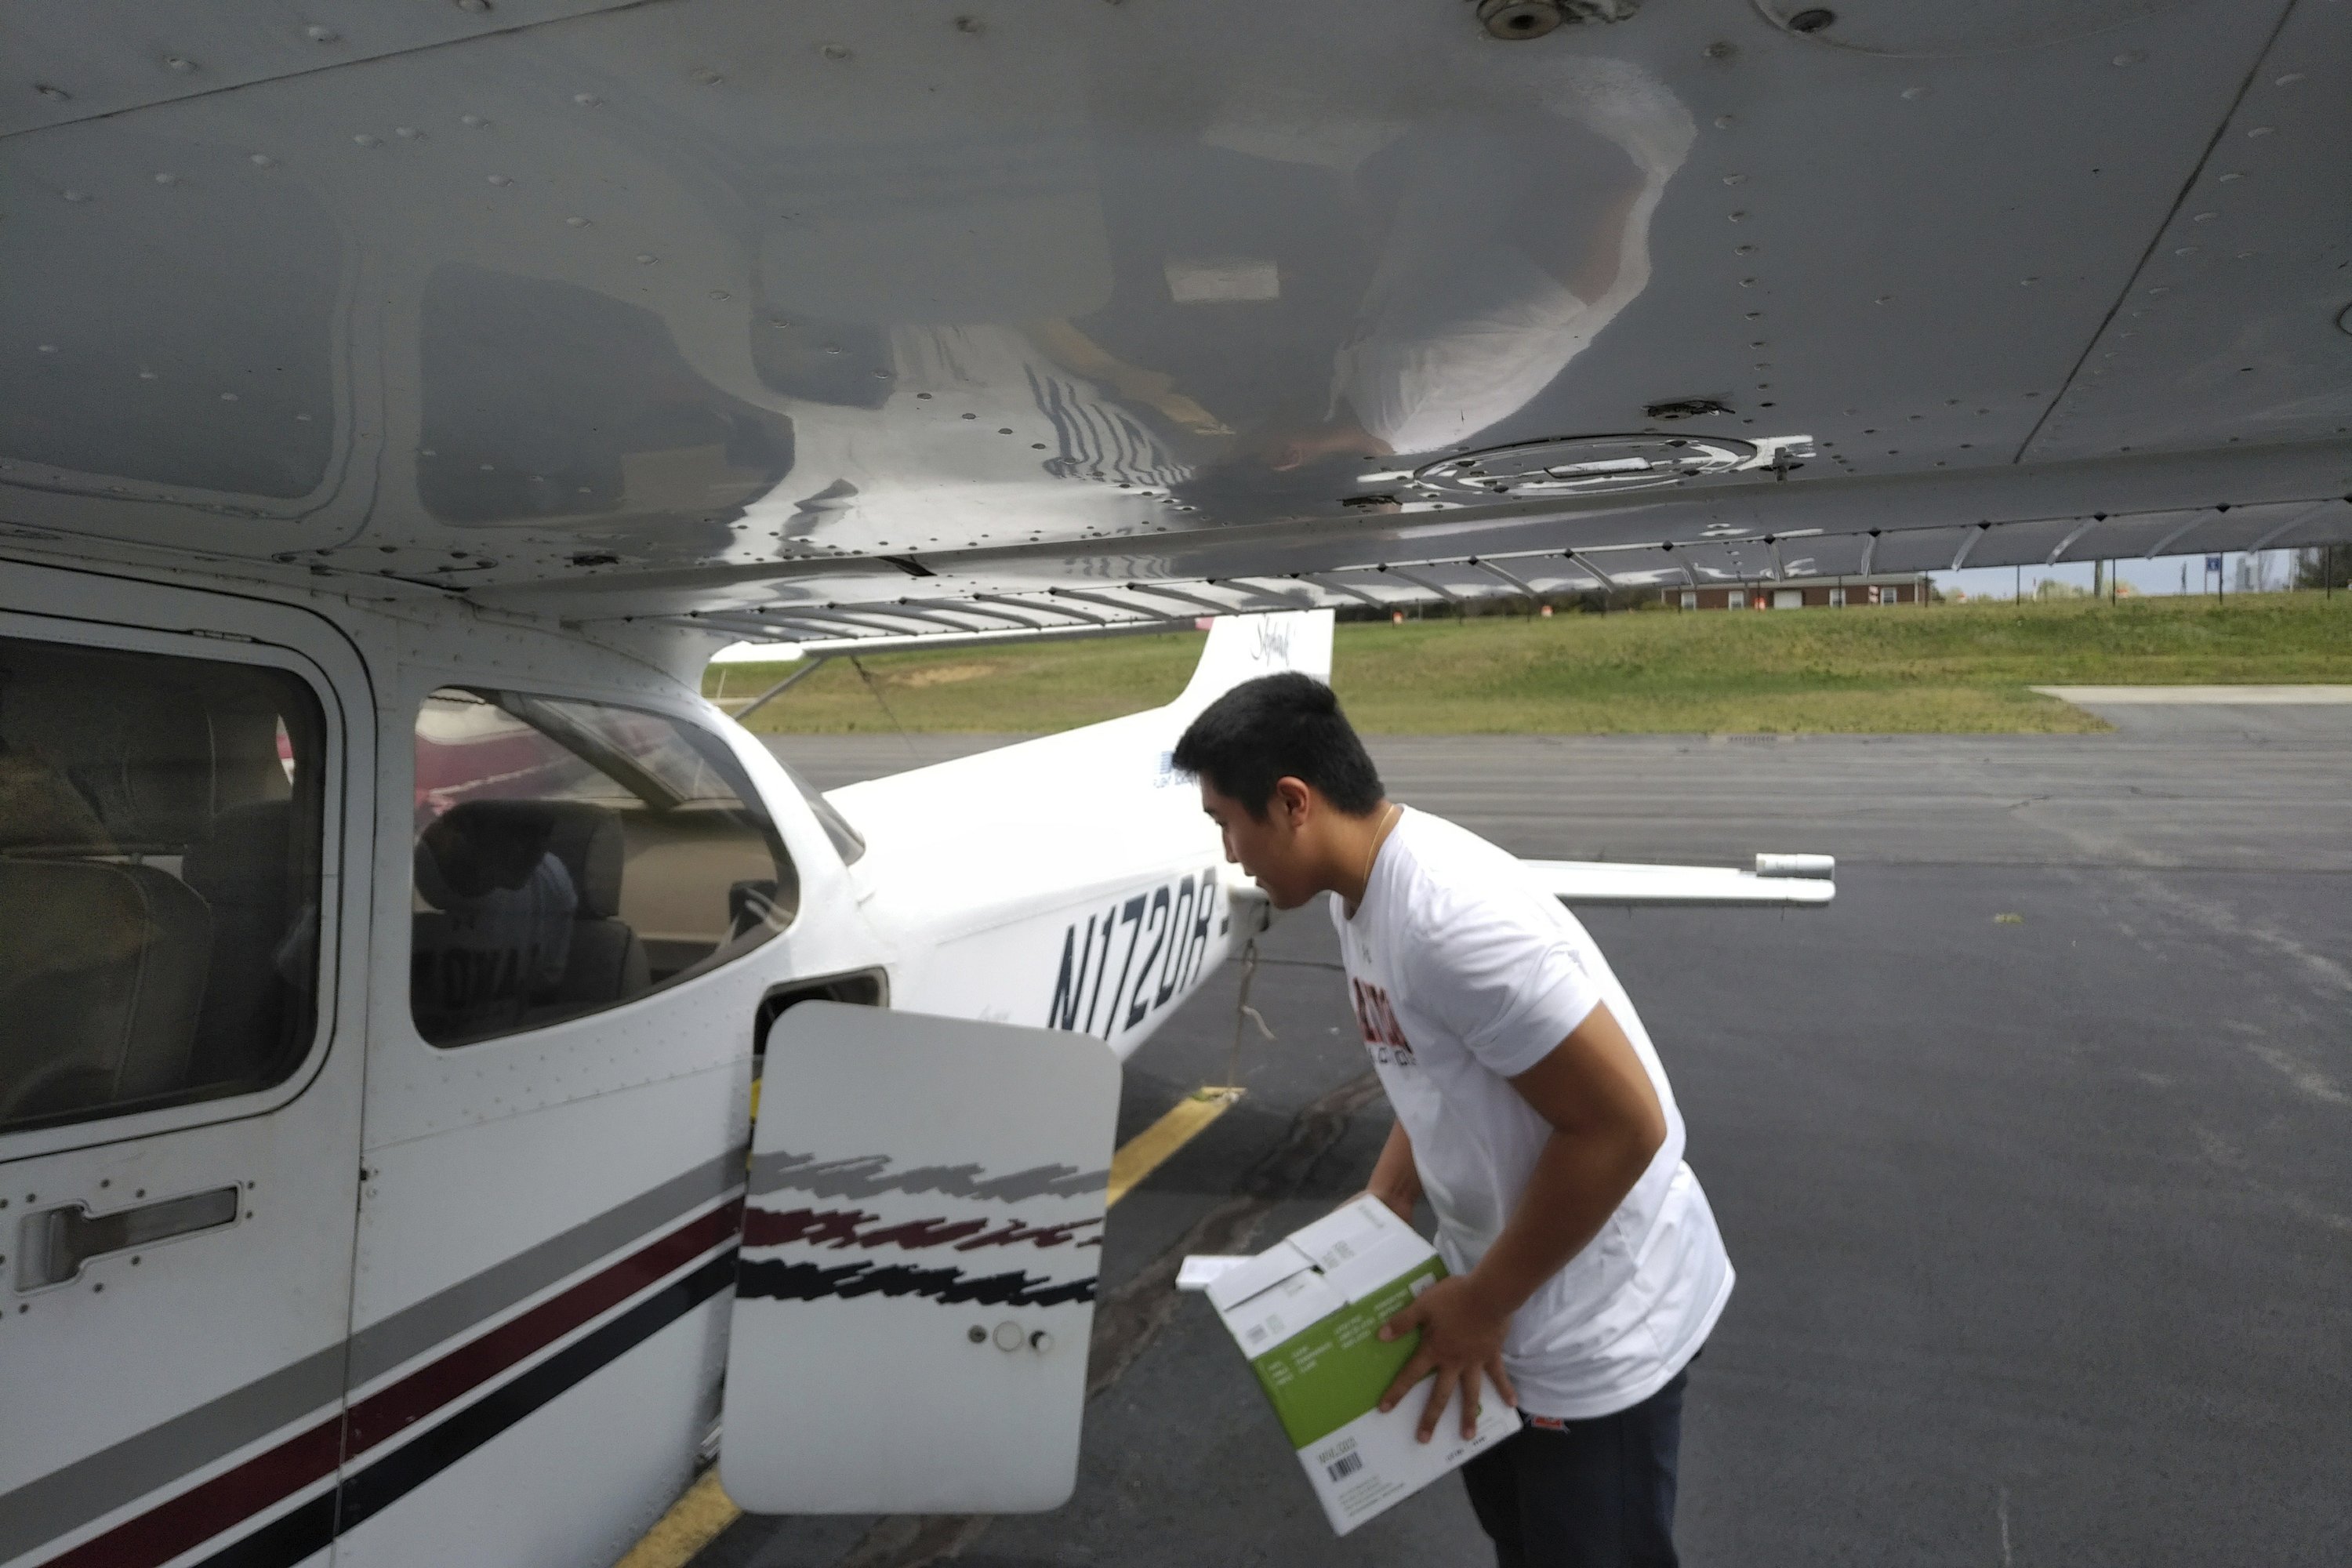 16-year-old pilot flies medical supplies to rural hospitals